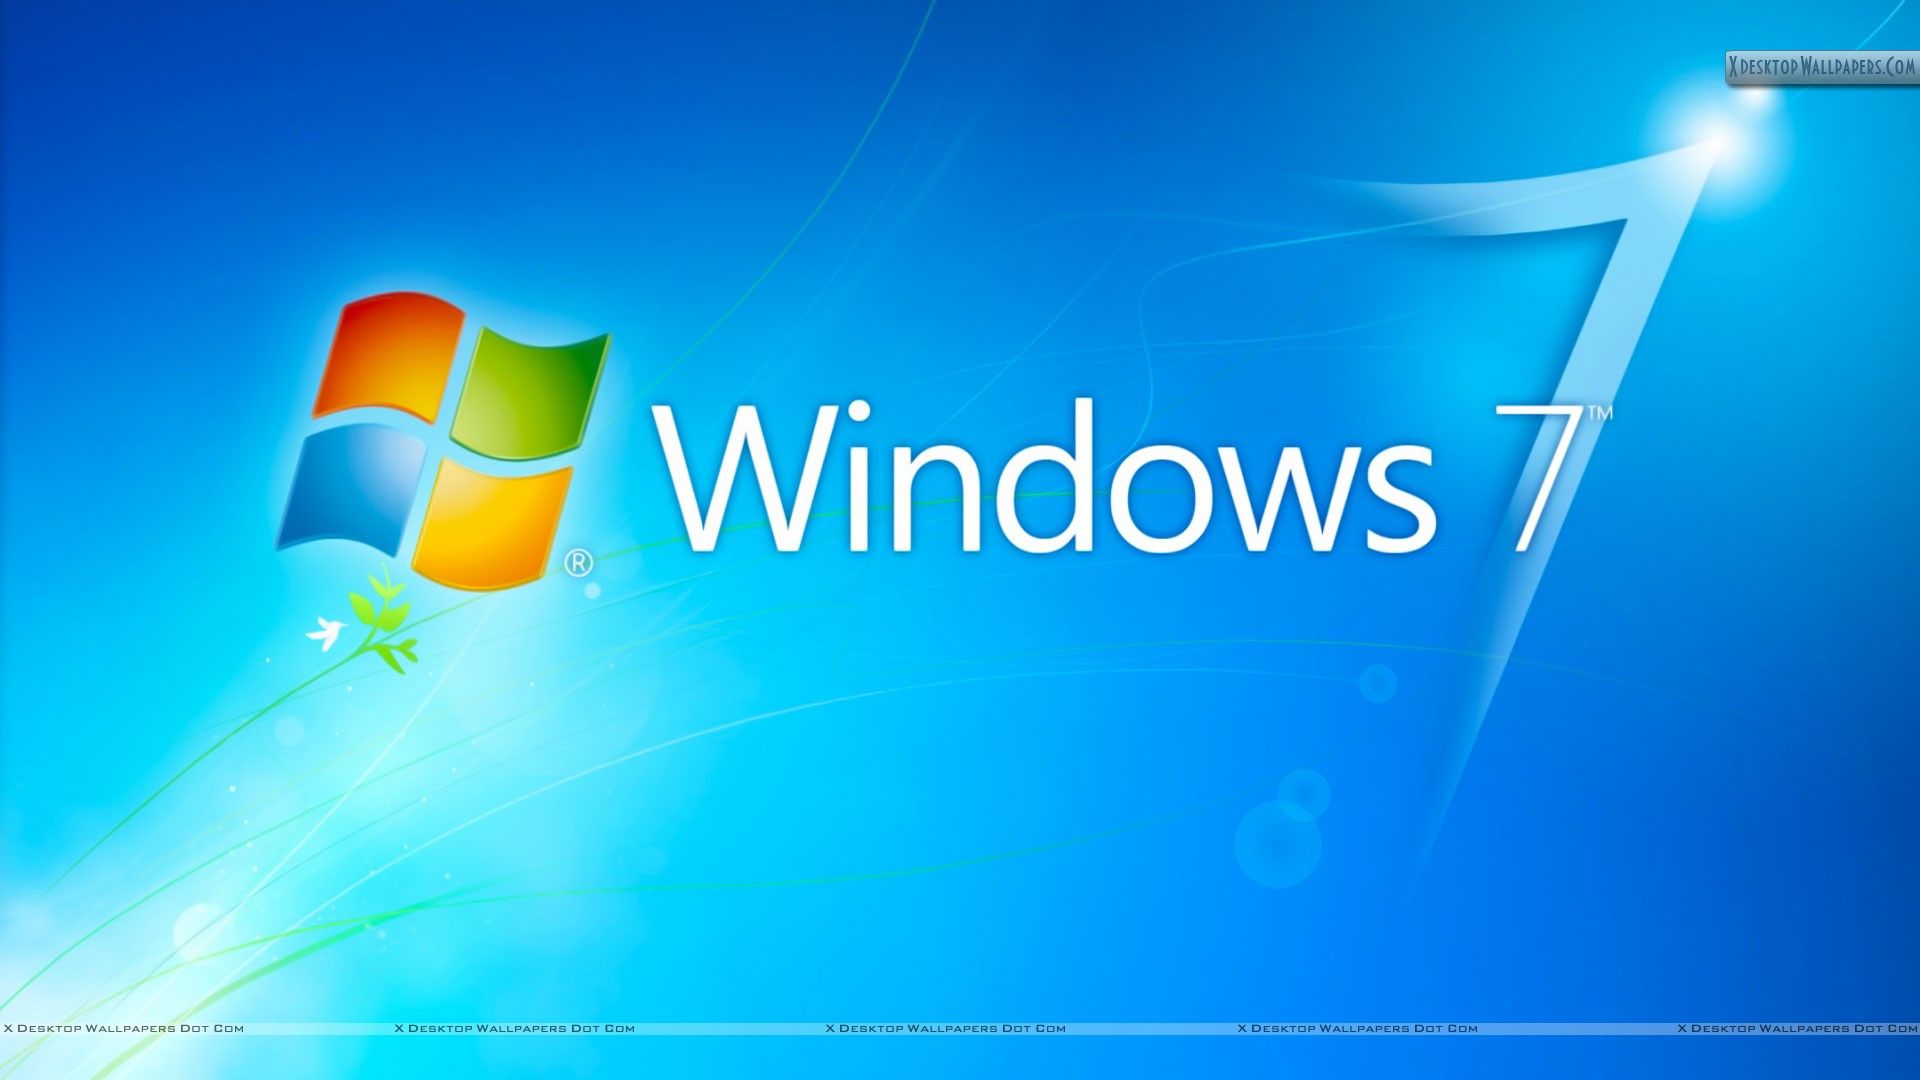 Windows 7 Wallpapers, Photos & Images in HD